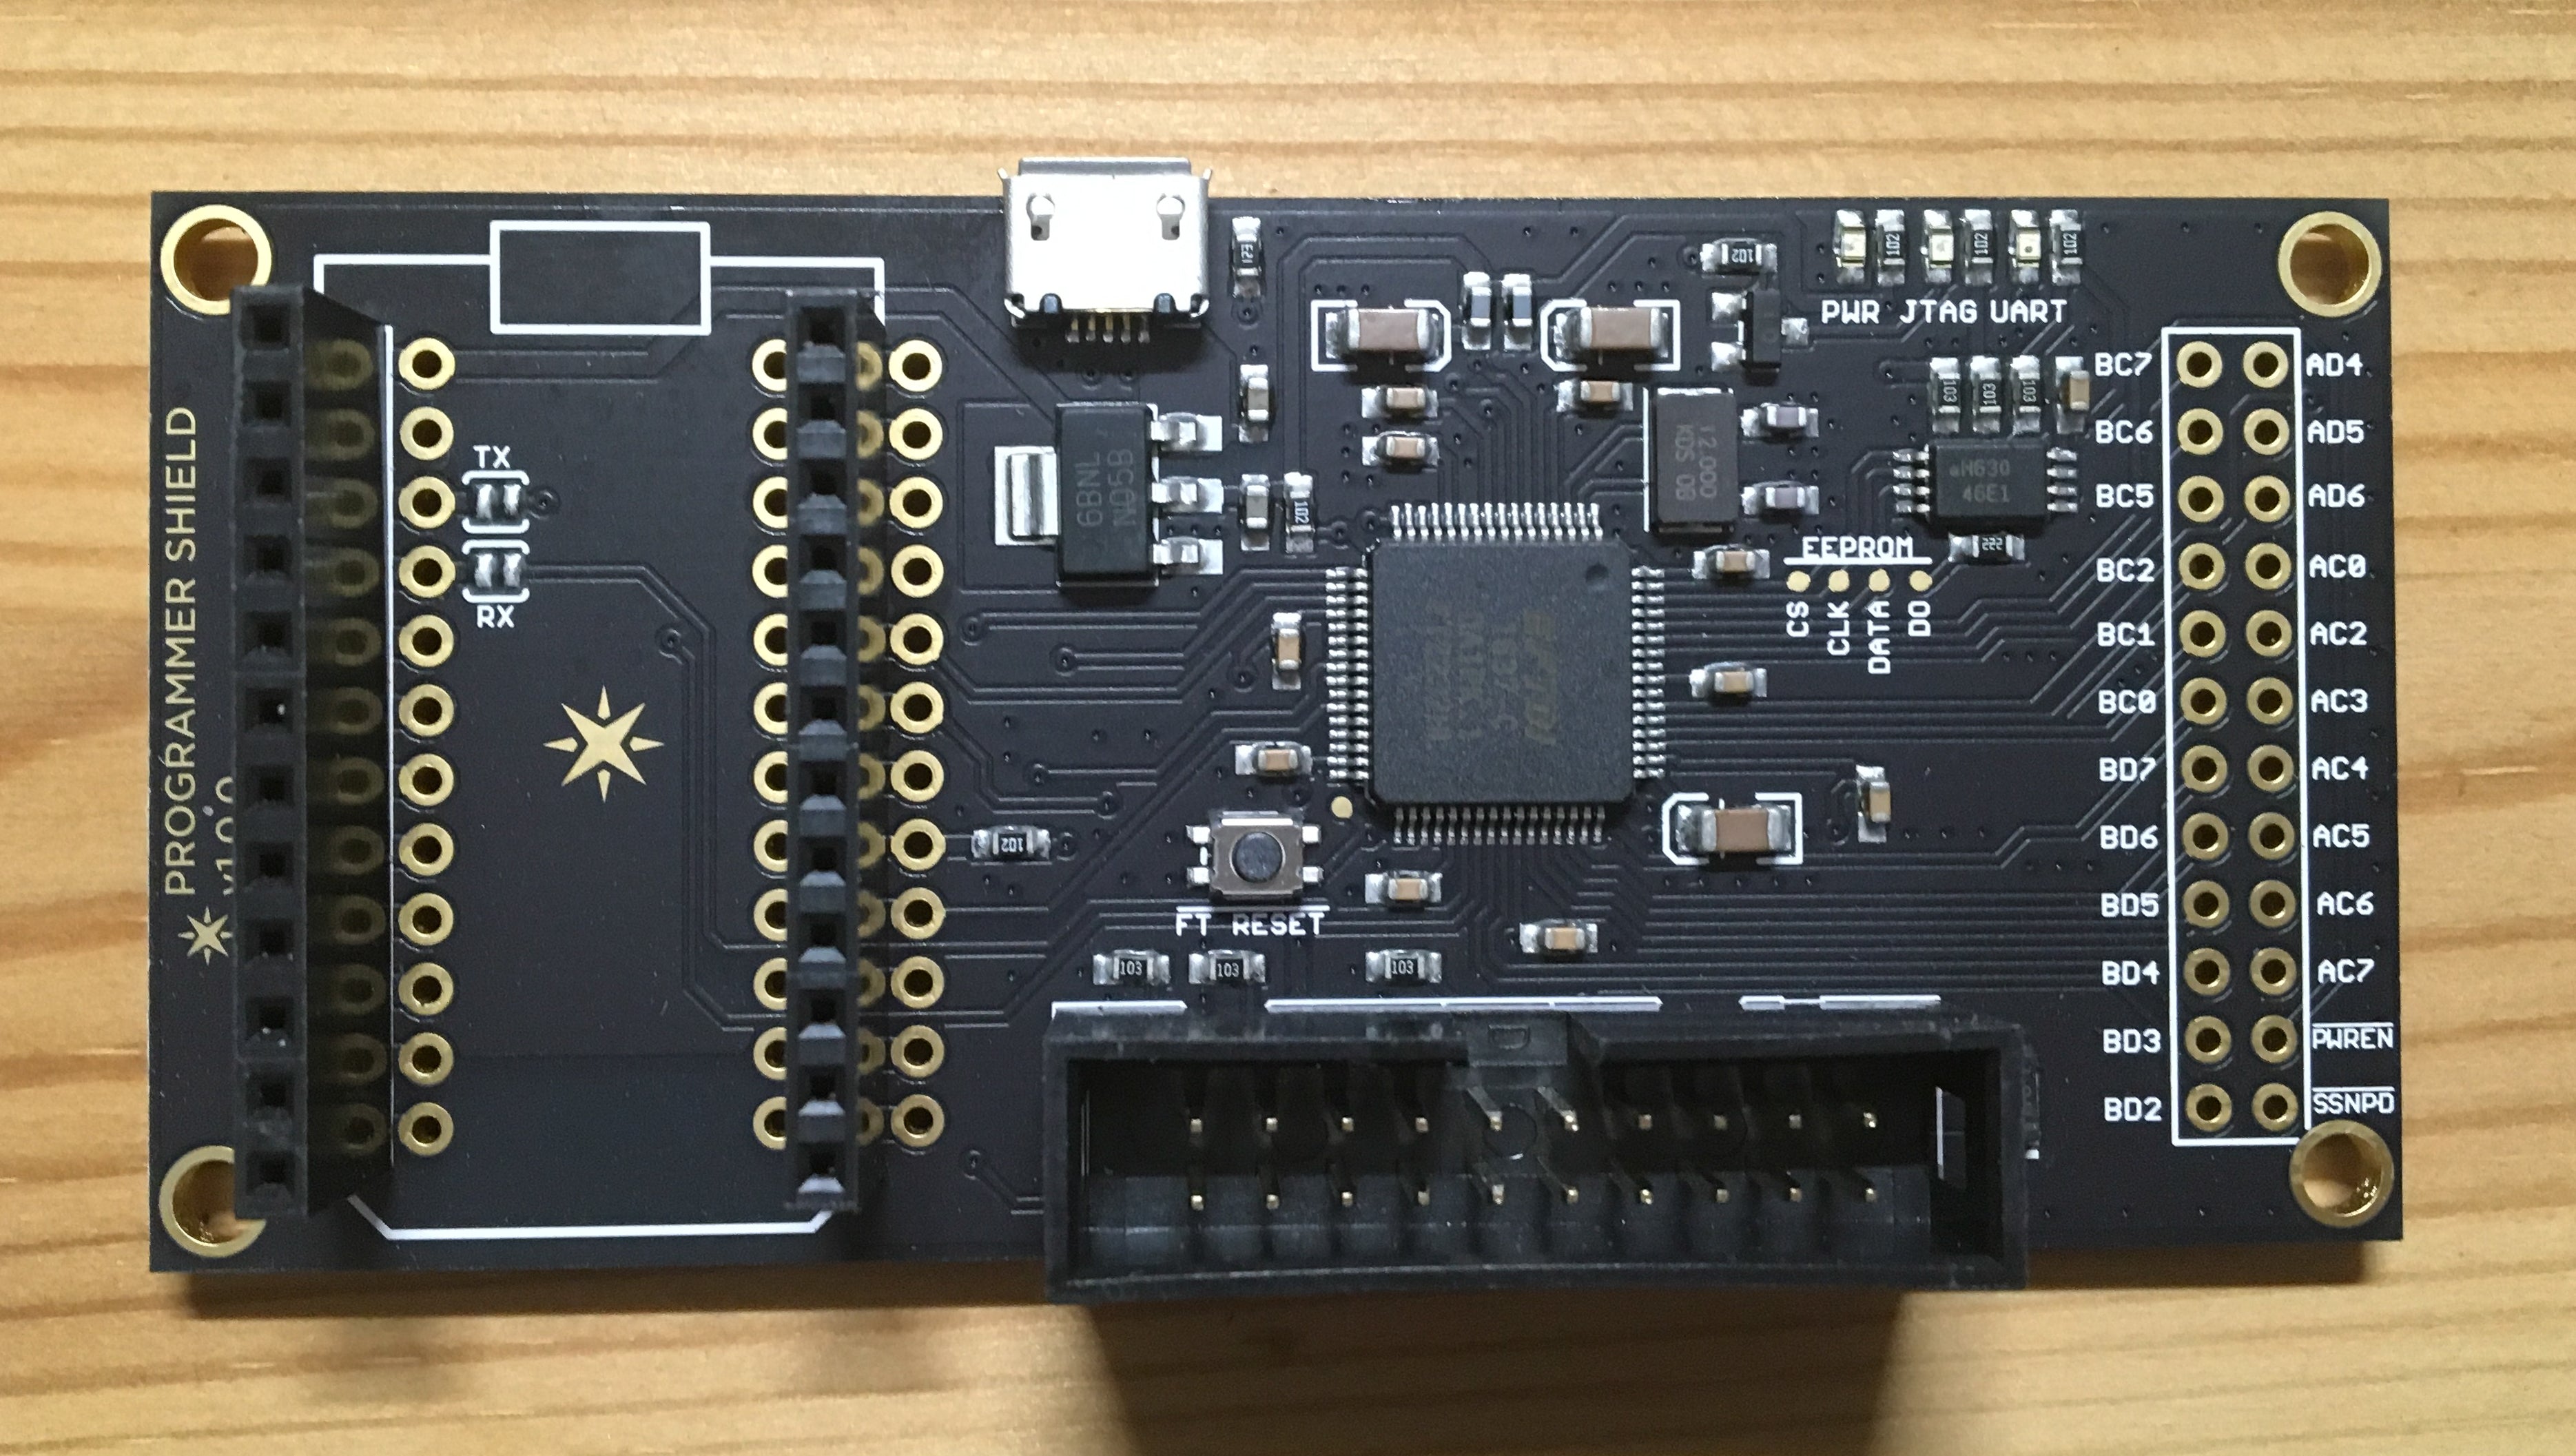 Particle Programmer Shield V1.0 for Photon - Server On The Move